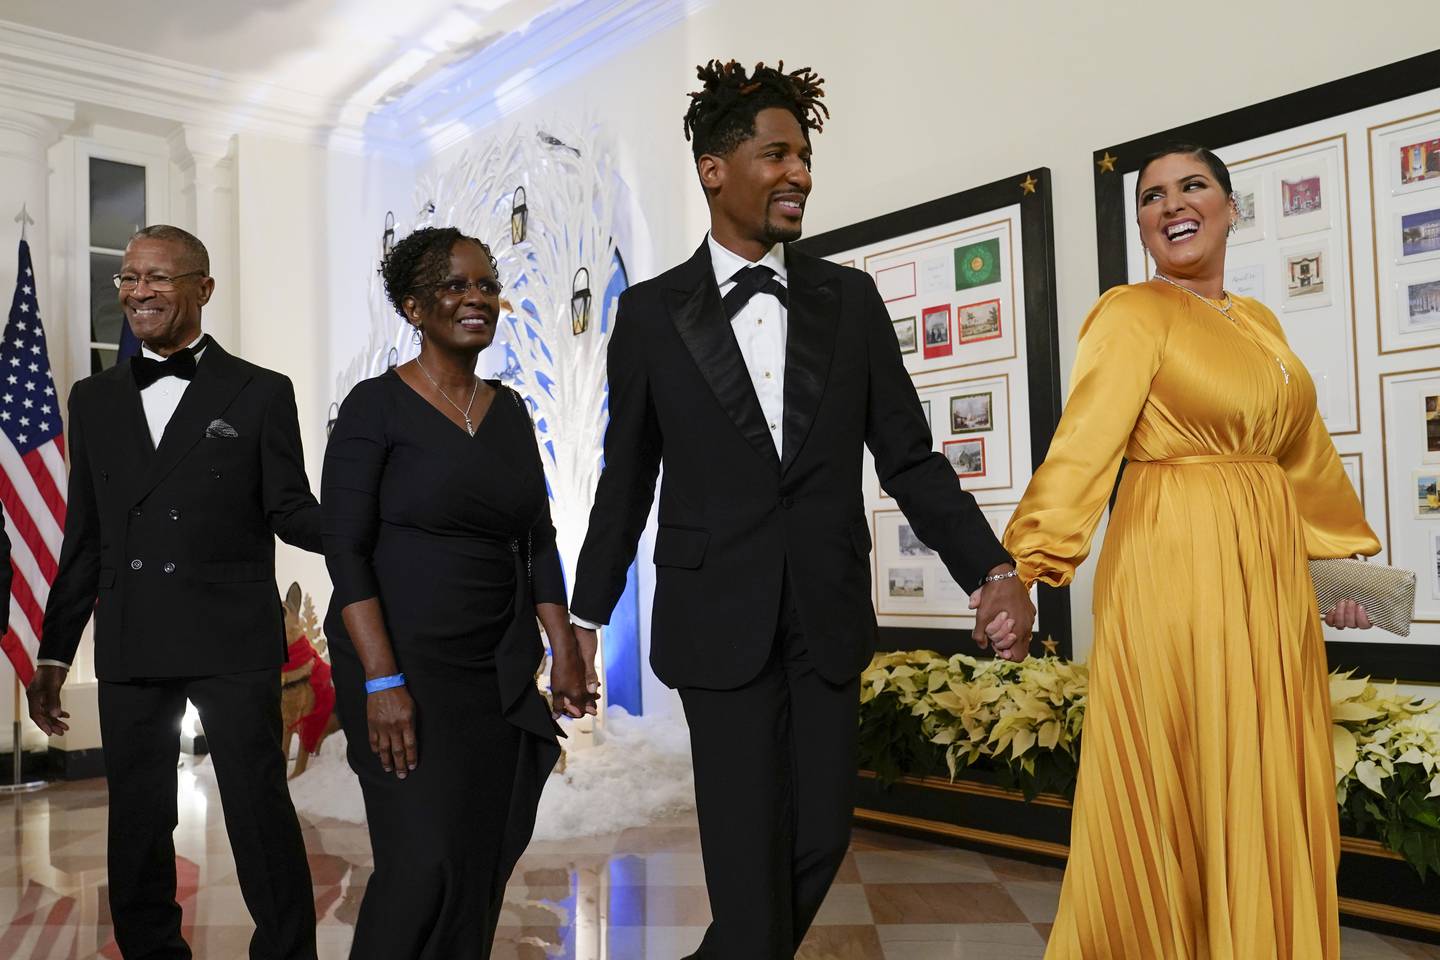 Musician Jon Batiste arrives with his wife Suleika Jaouad and family members. AP Photo